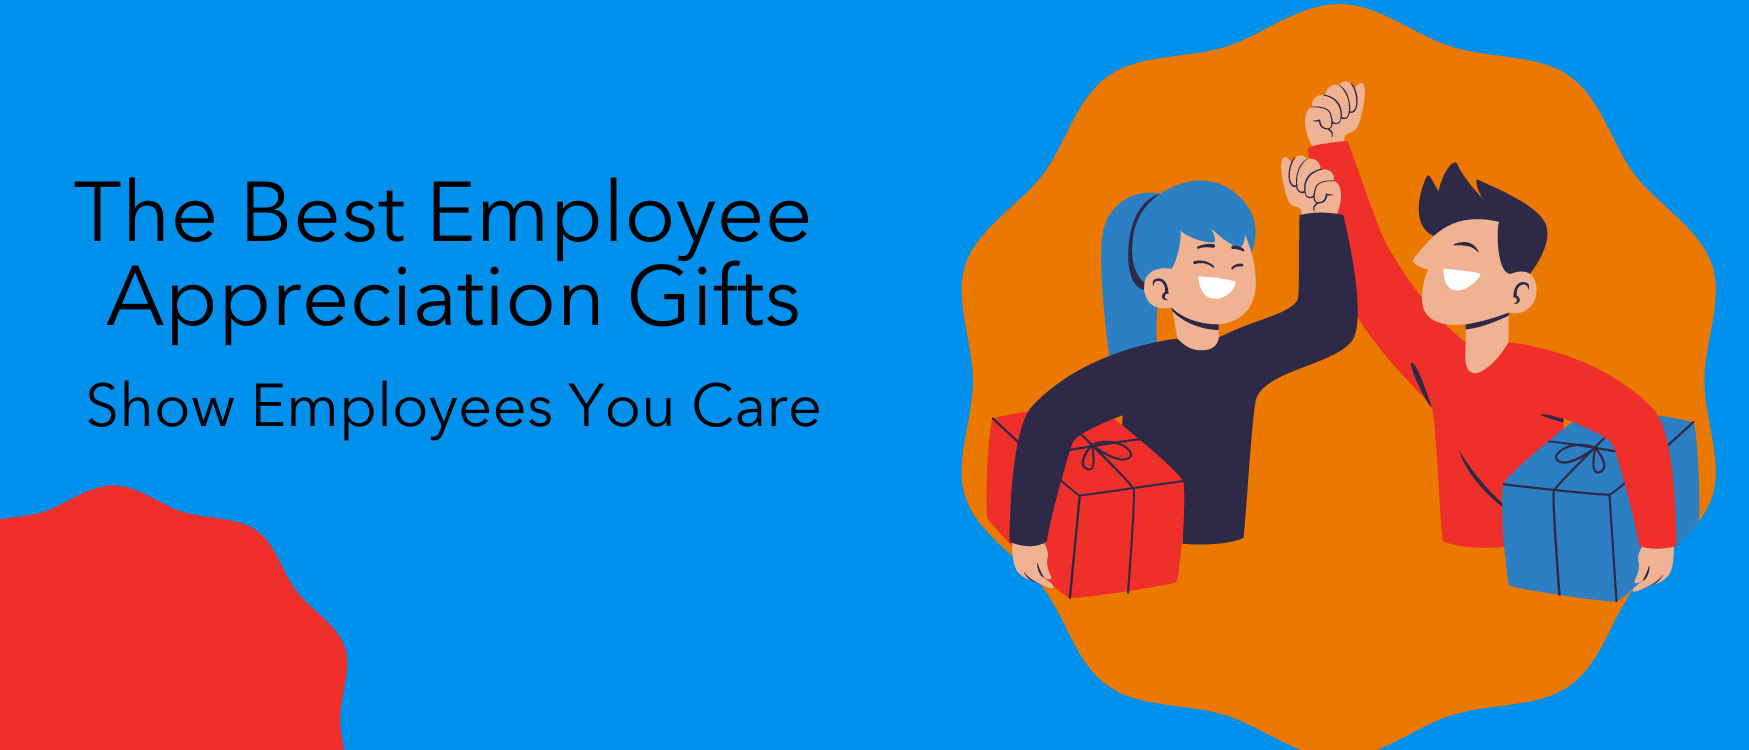 Gift Ideas for Coworkers (Teammates, Staff, Boss & More)